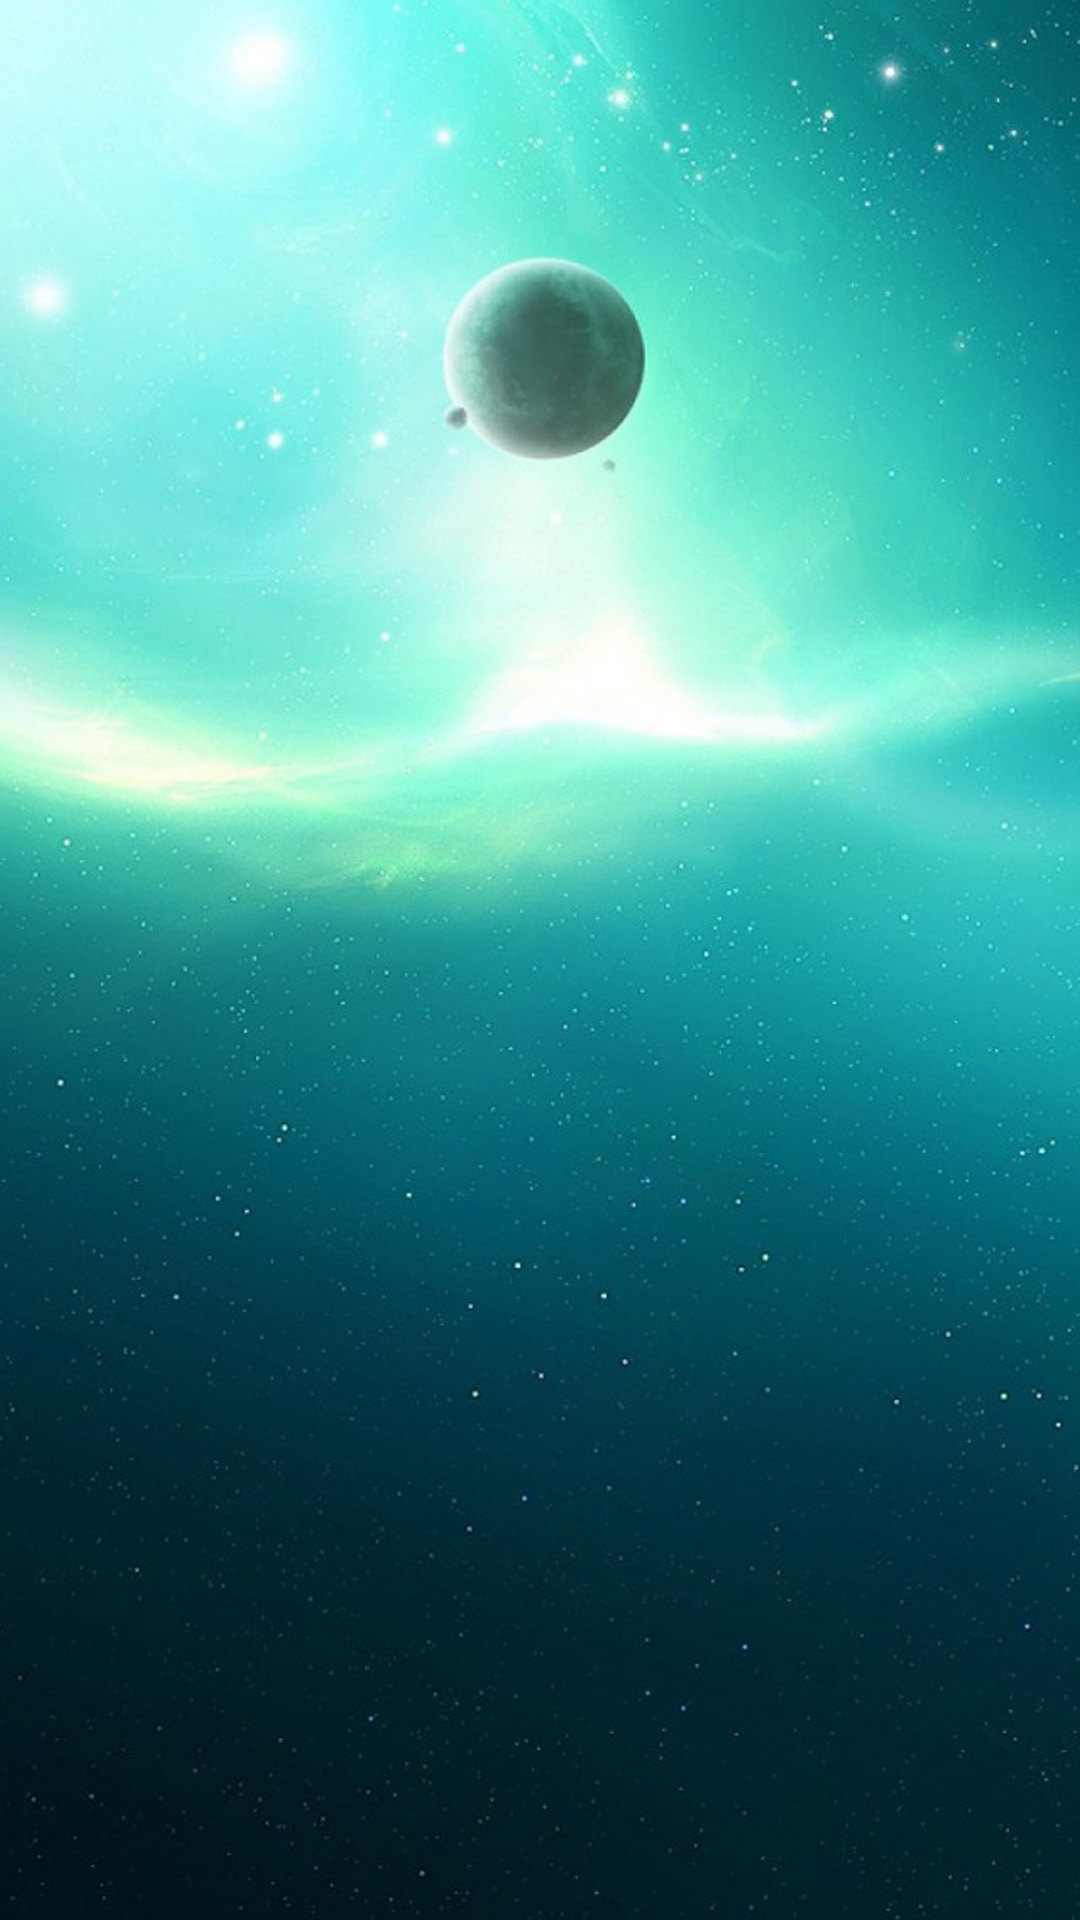 Space LG G2 Wallpapers HD 59, LG G2 Wallpapers, LG Wallpapers